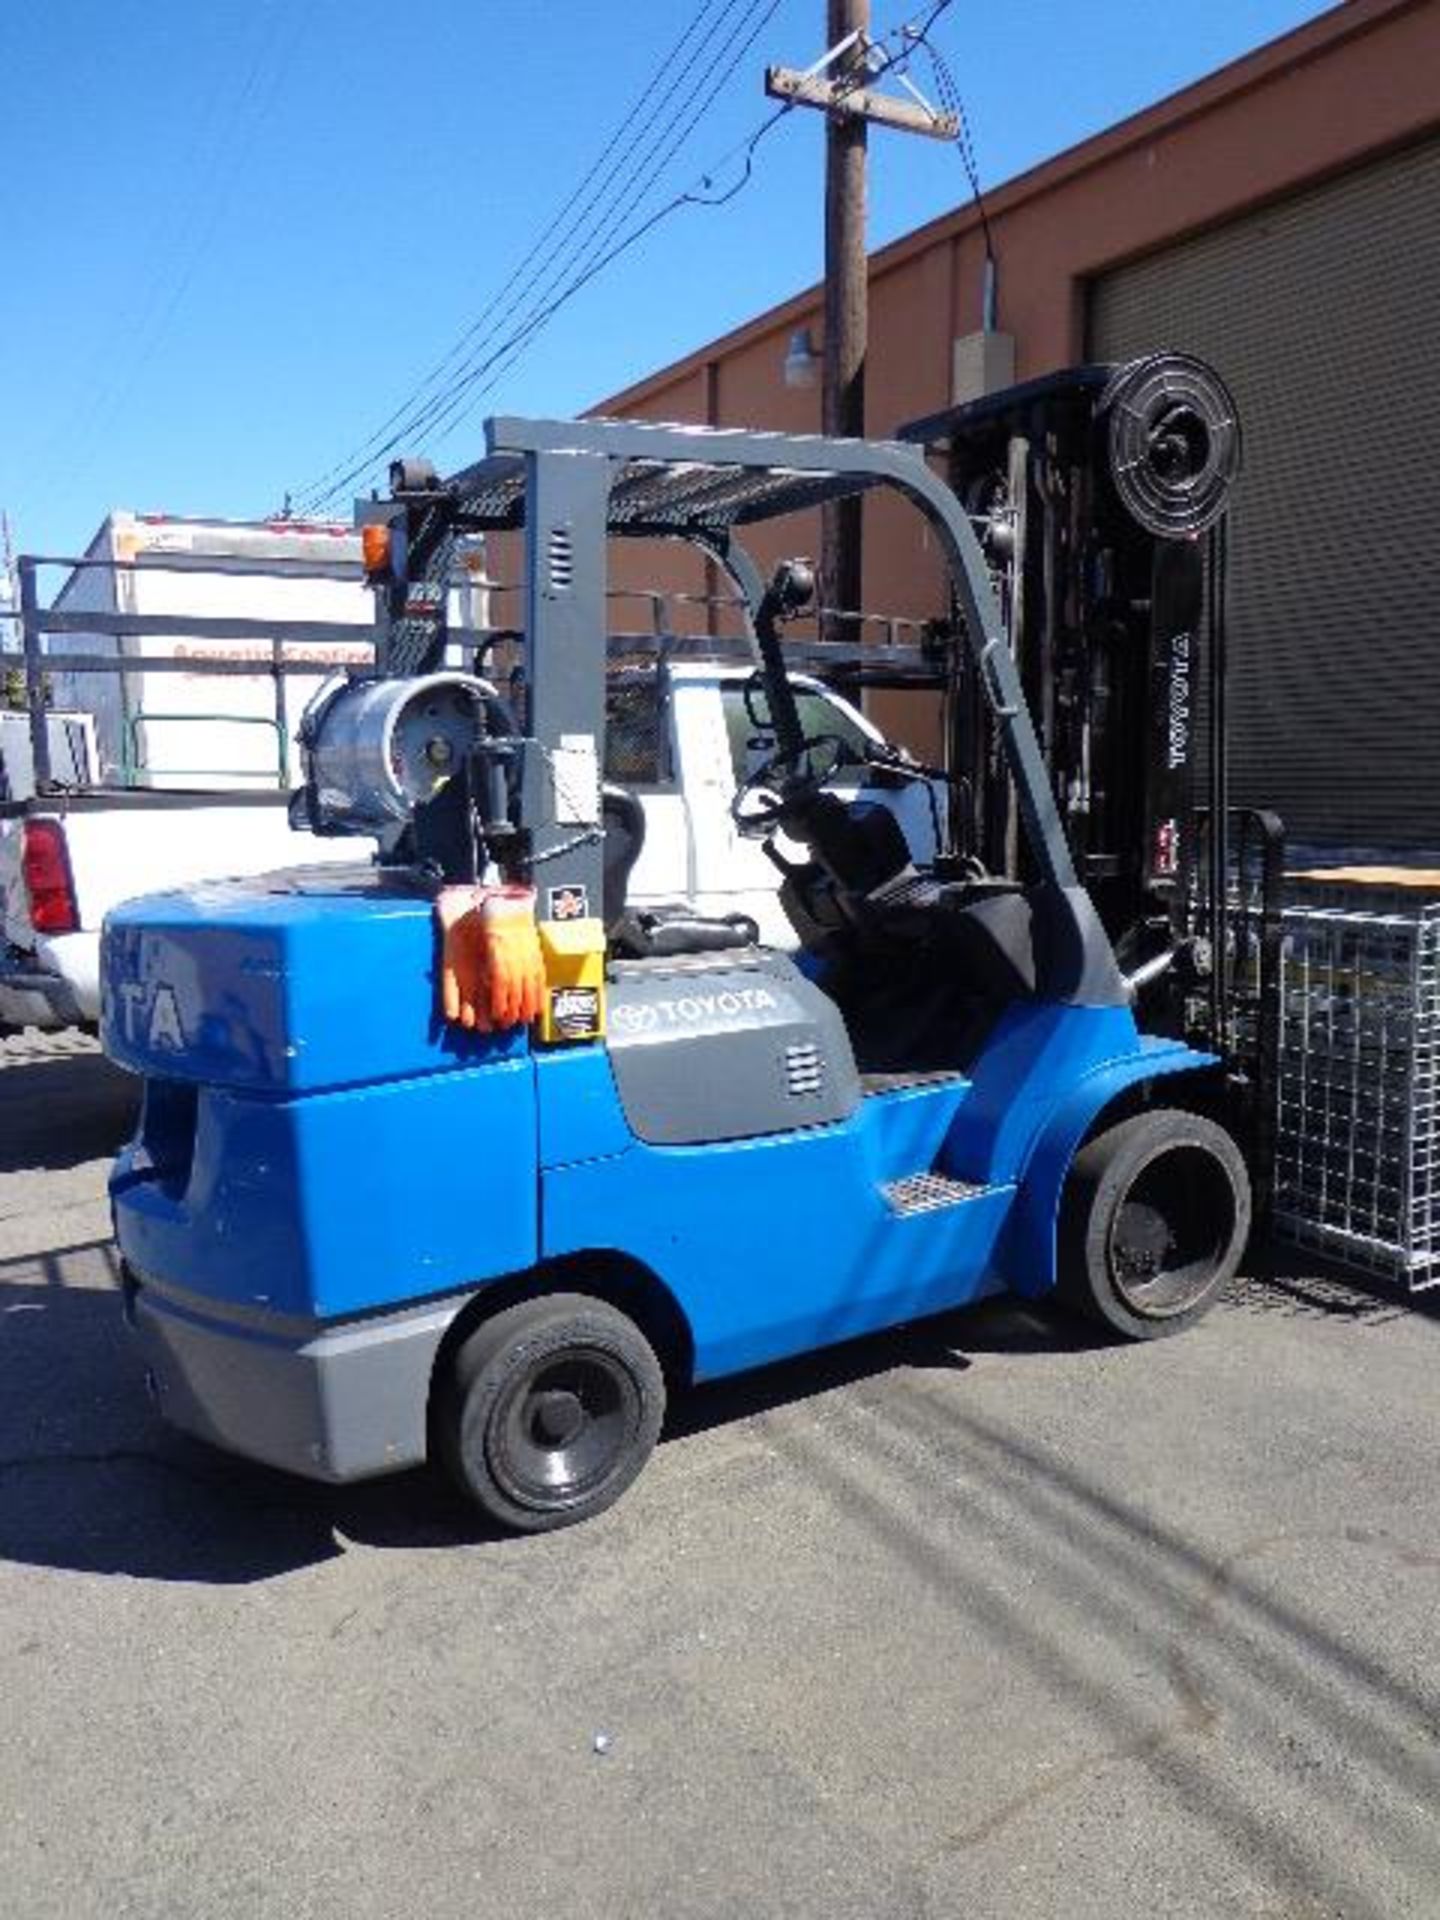 Toyota 7FGCU45 9000 Lb Cap LPG Forklift s/n 70247 w/ 3-Stage Mast, 187” Lift Height, SS, SOLD AS IS - Image 3 of 12